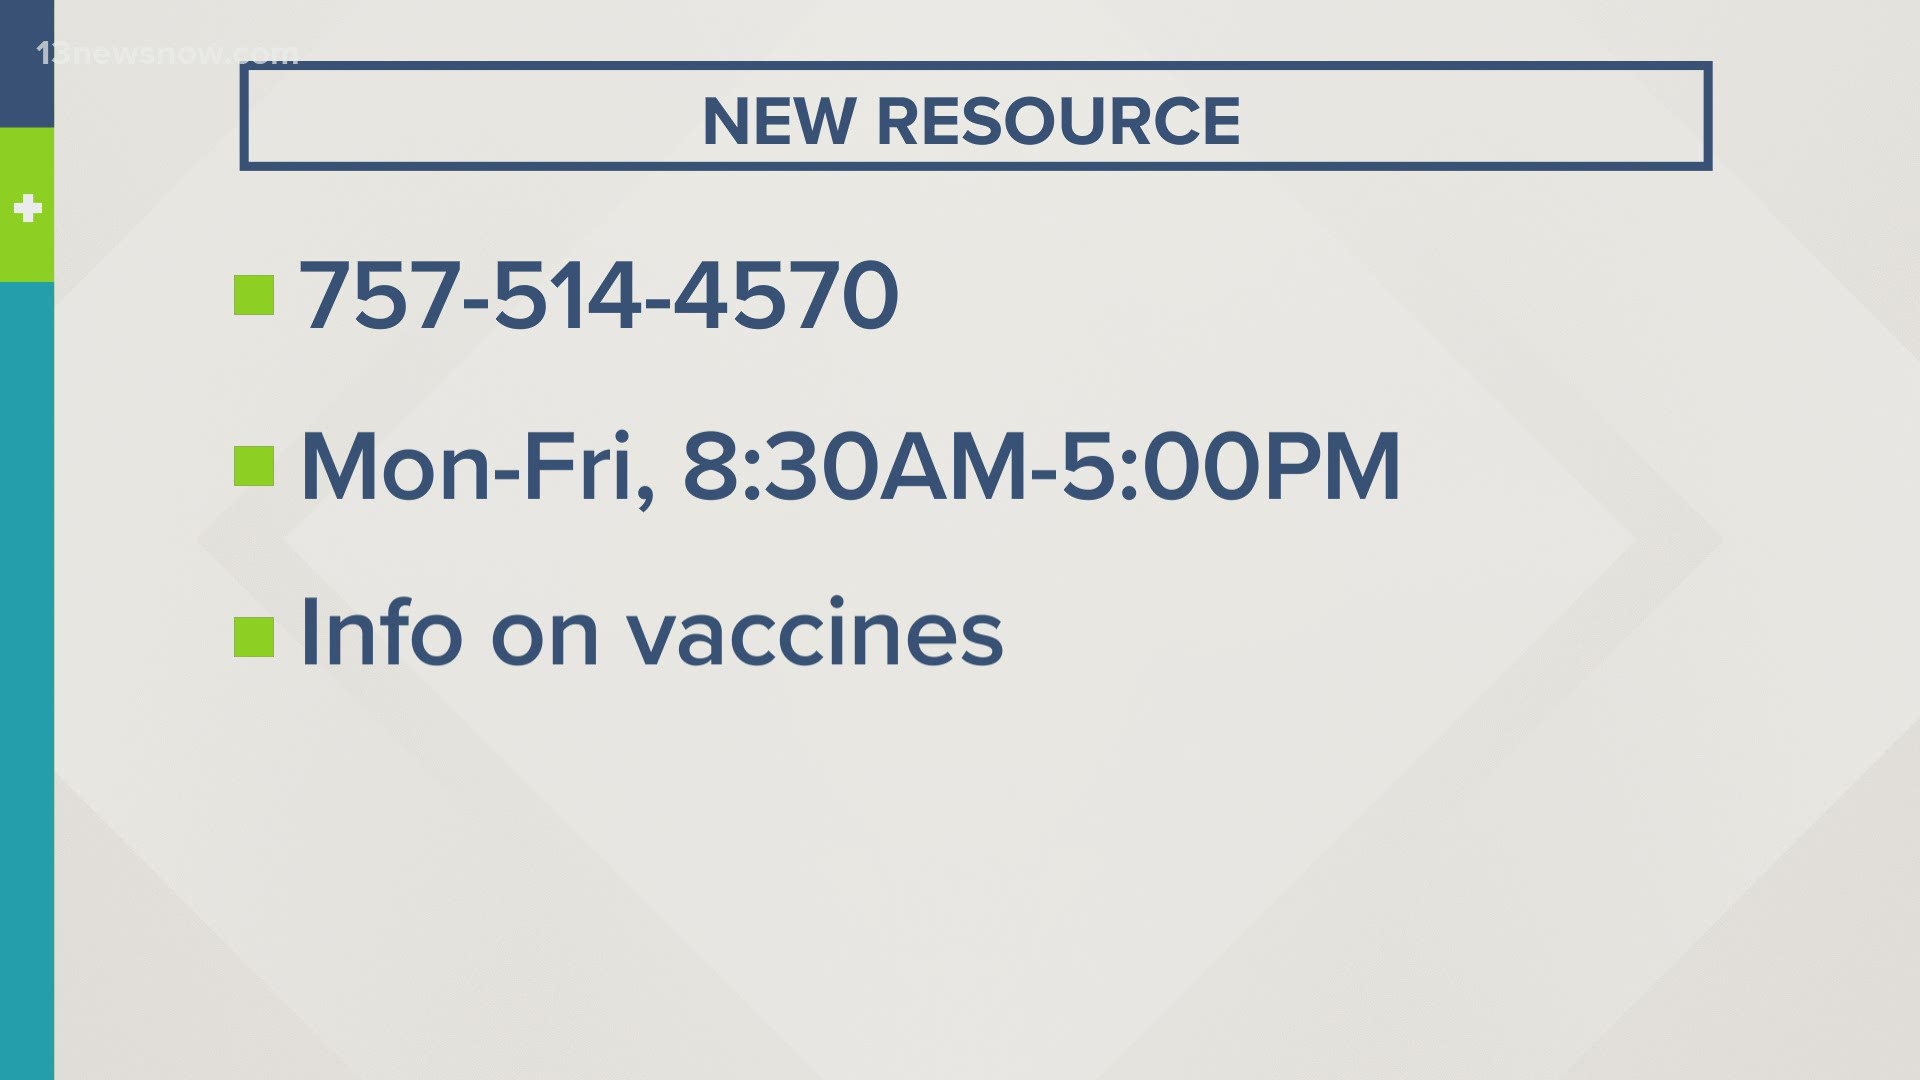 A call center opened in Suffolk for residents in the Western Tidewater Health District who may have questions about the COVID-19 vaccine.